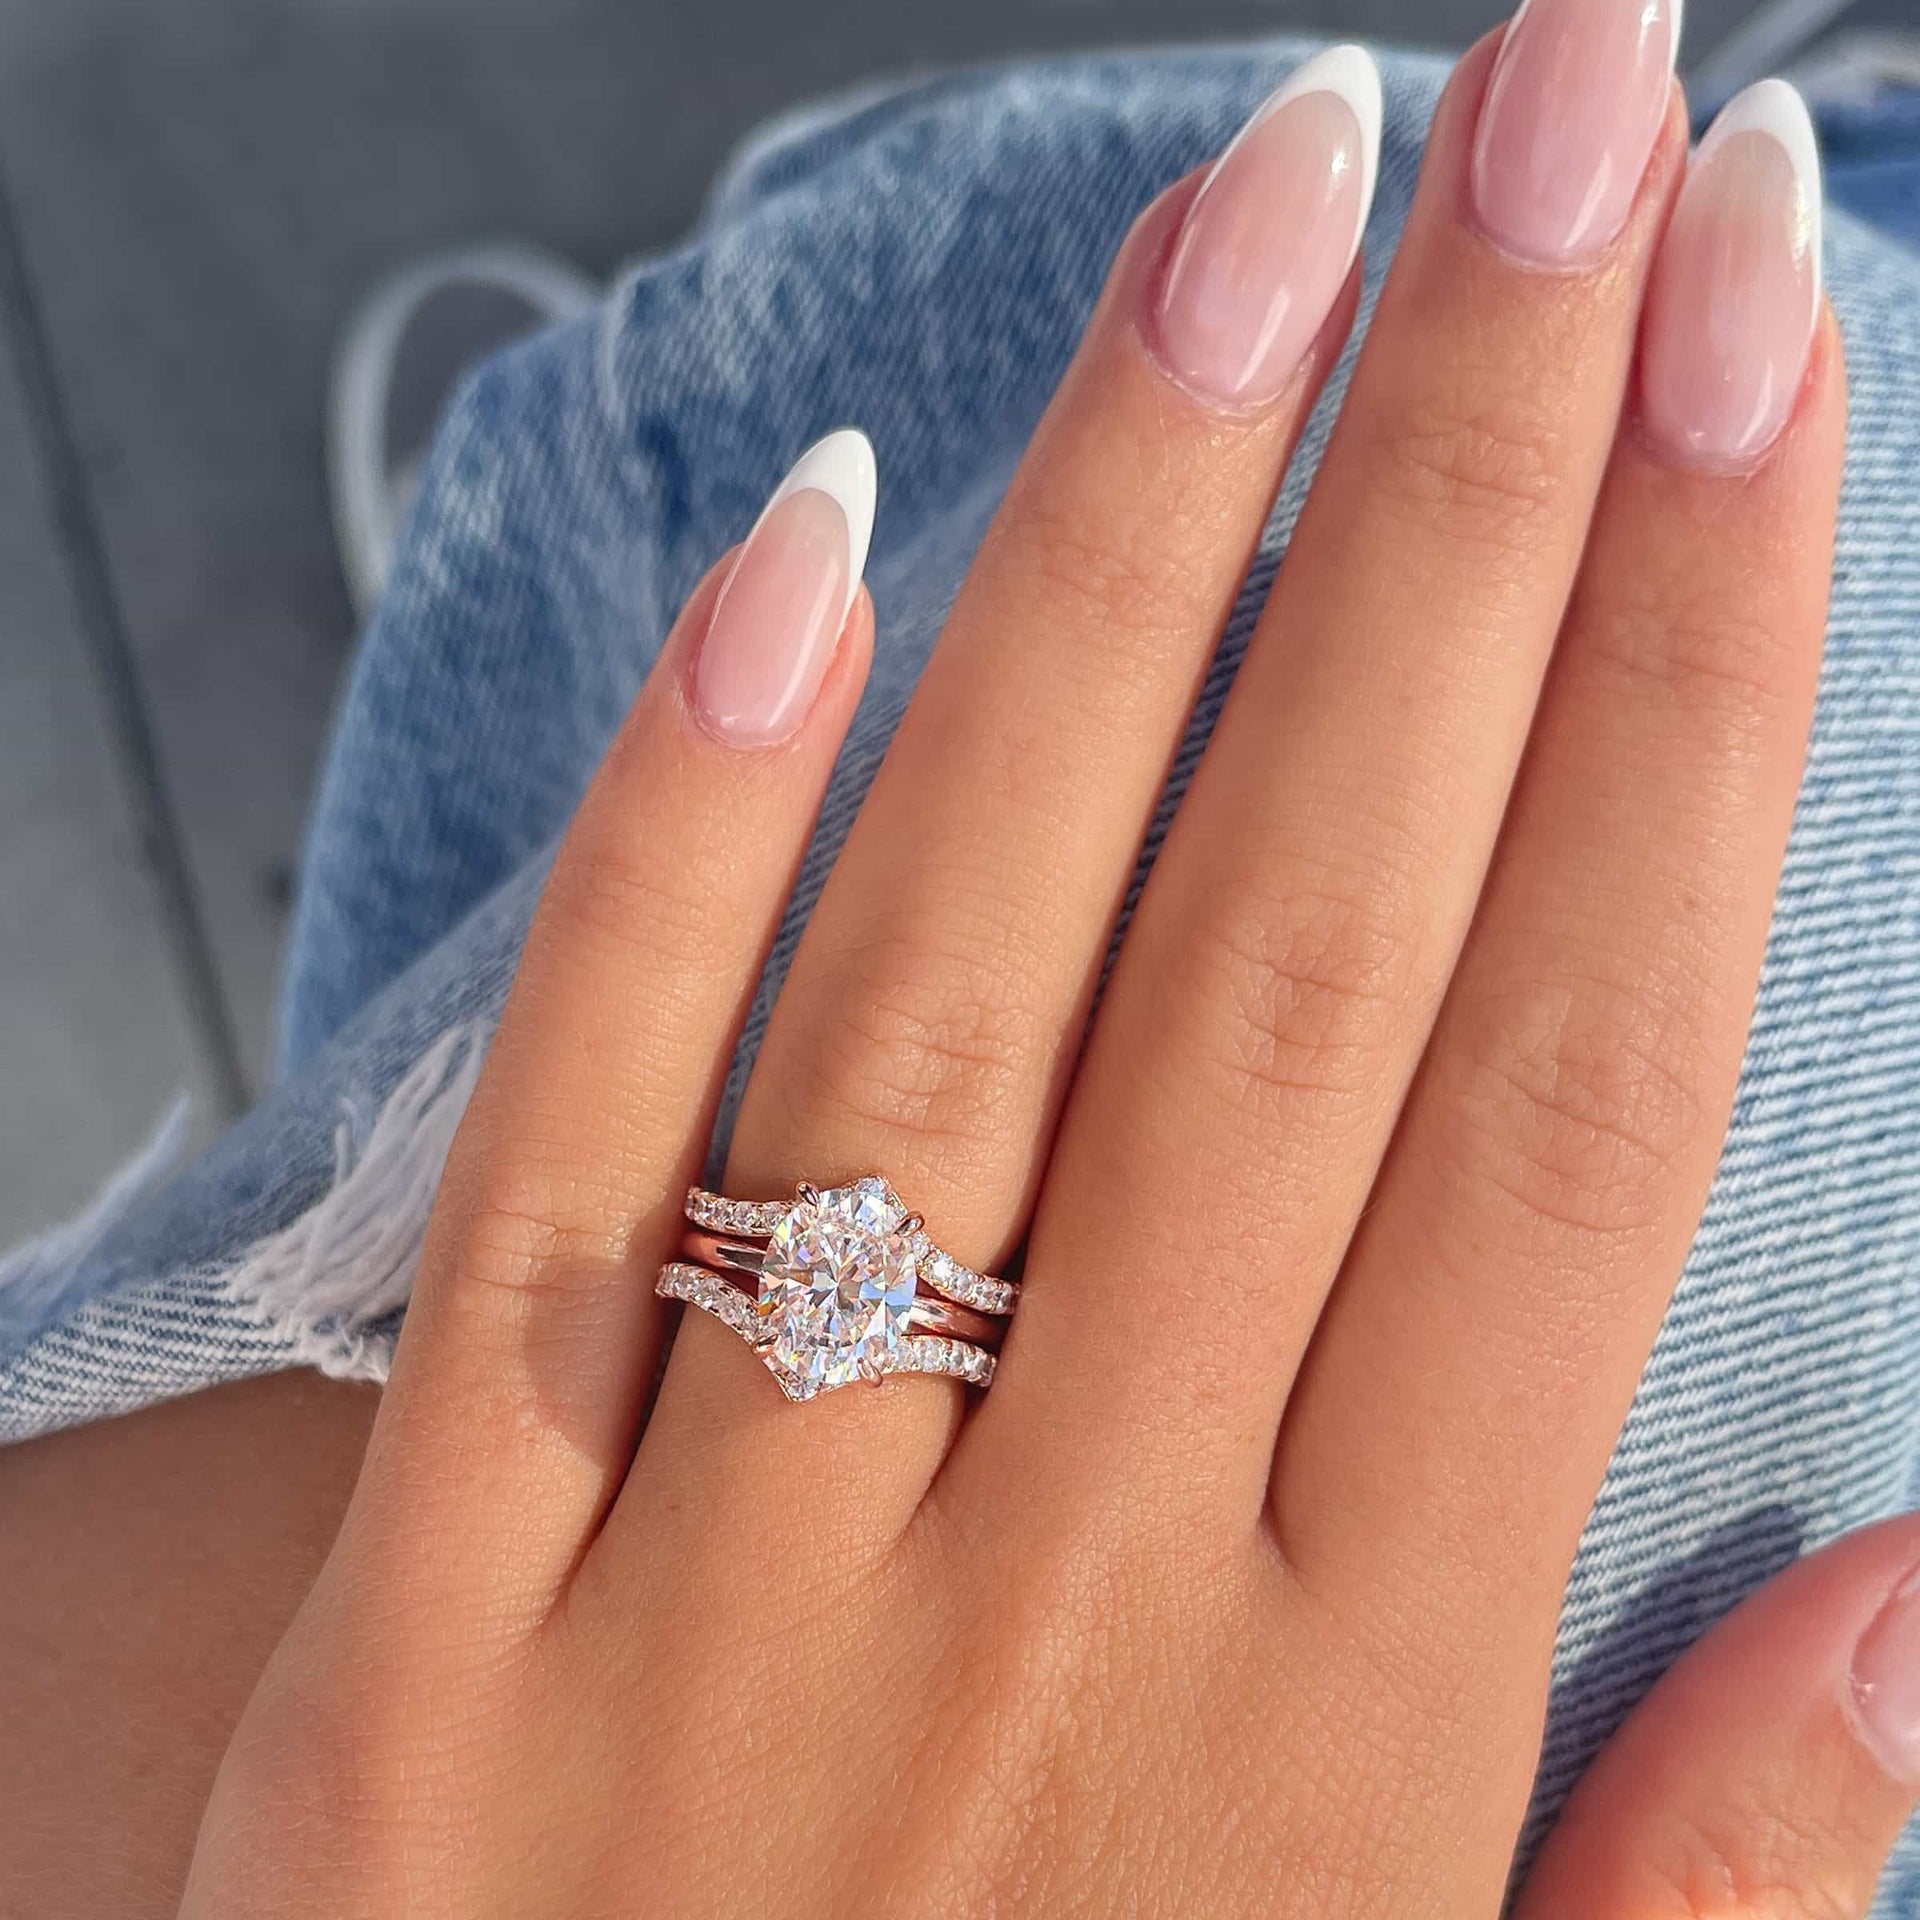 Two rose gold v-shaped half eternity wedding bands paired with a rose gold oval cut solitaire engagement ring modeled on female hand with French tip nails